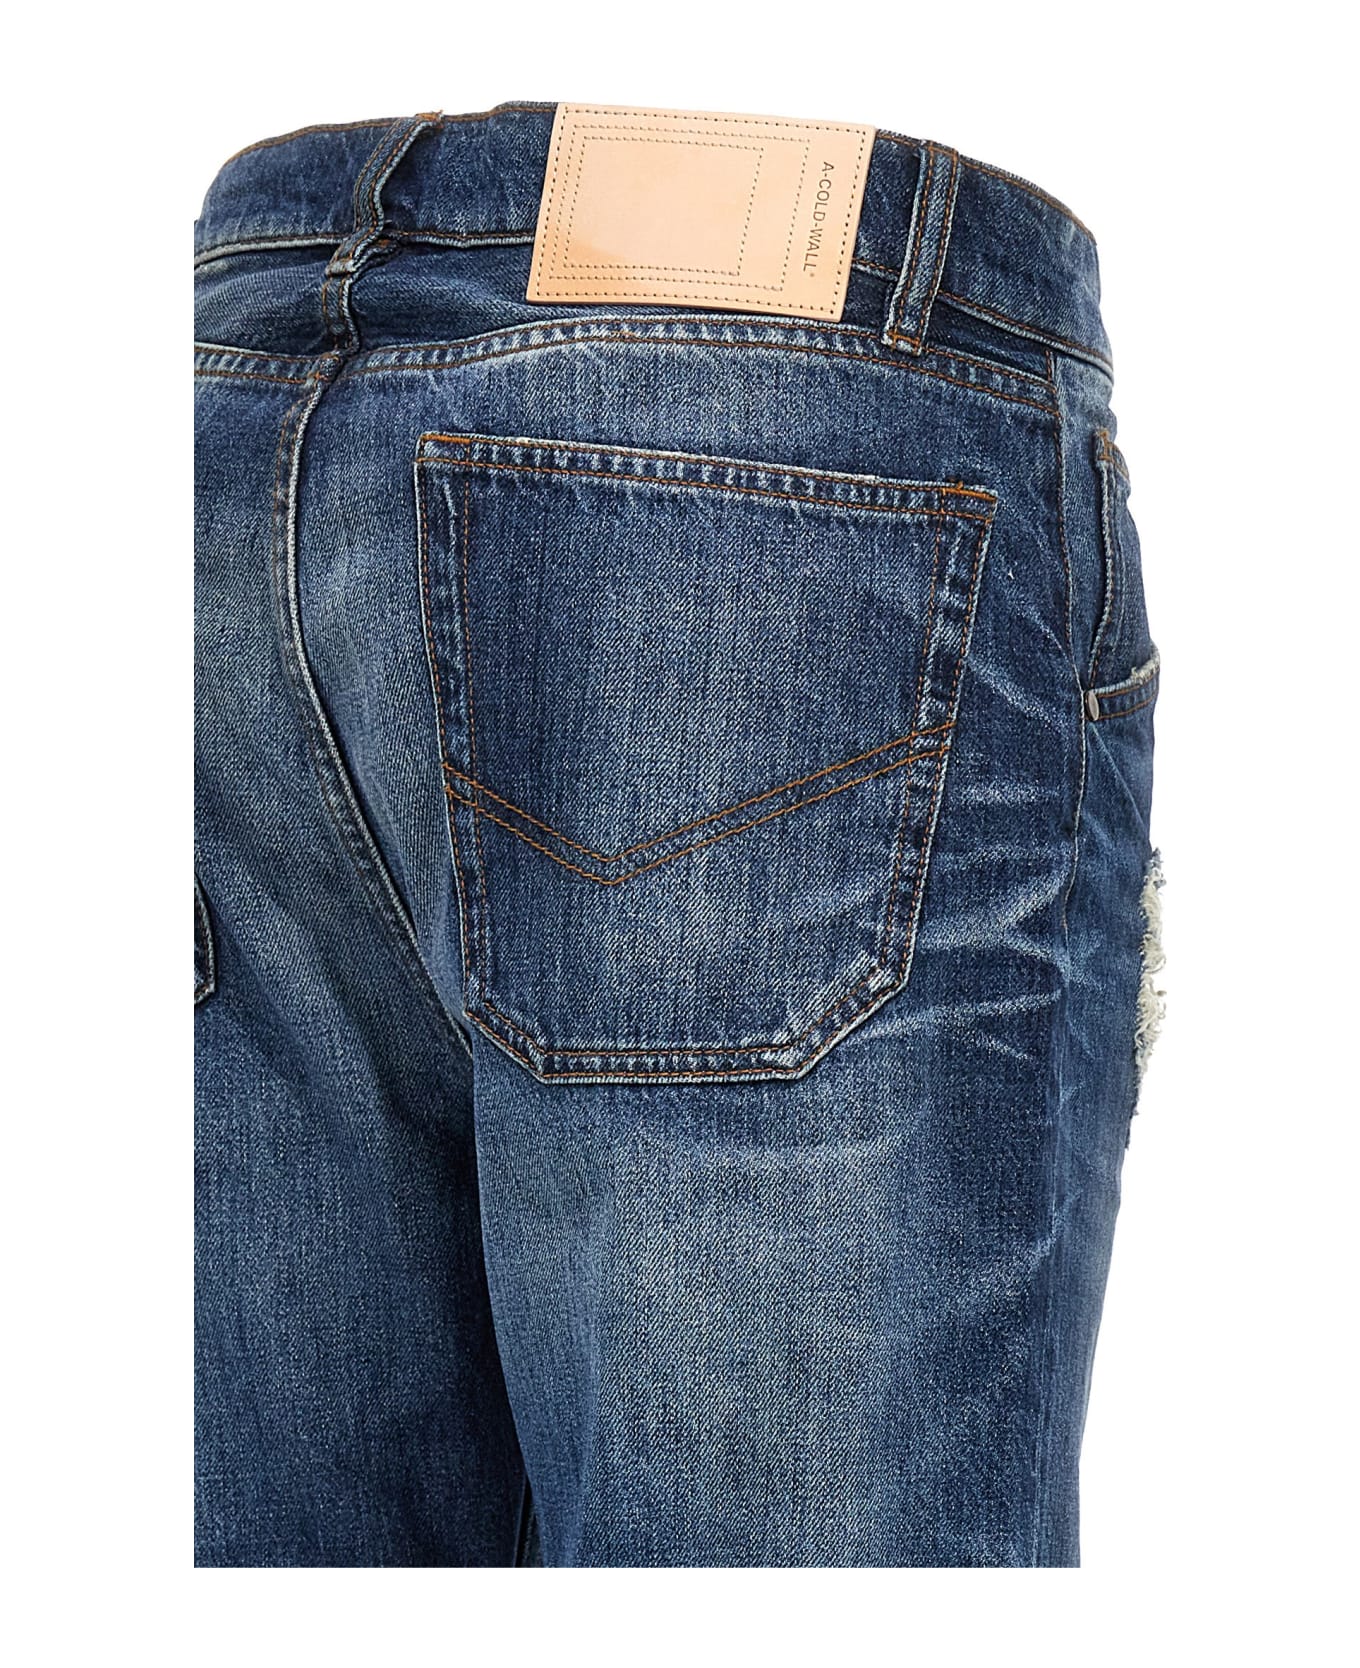 A-COLD-WALL 'foundry' Jeans - Blue デニム